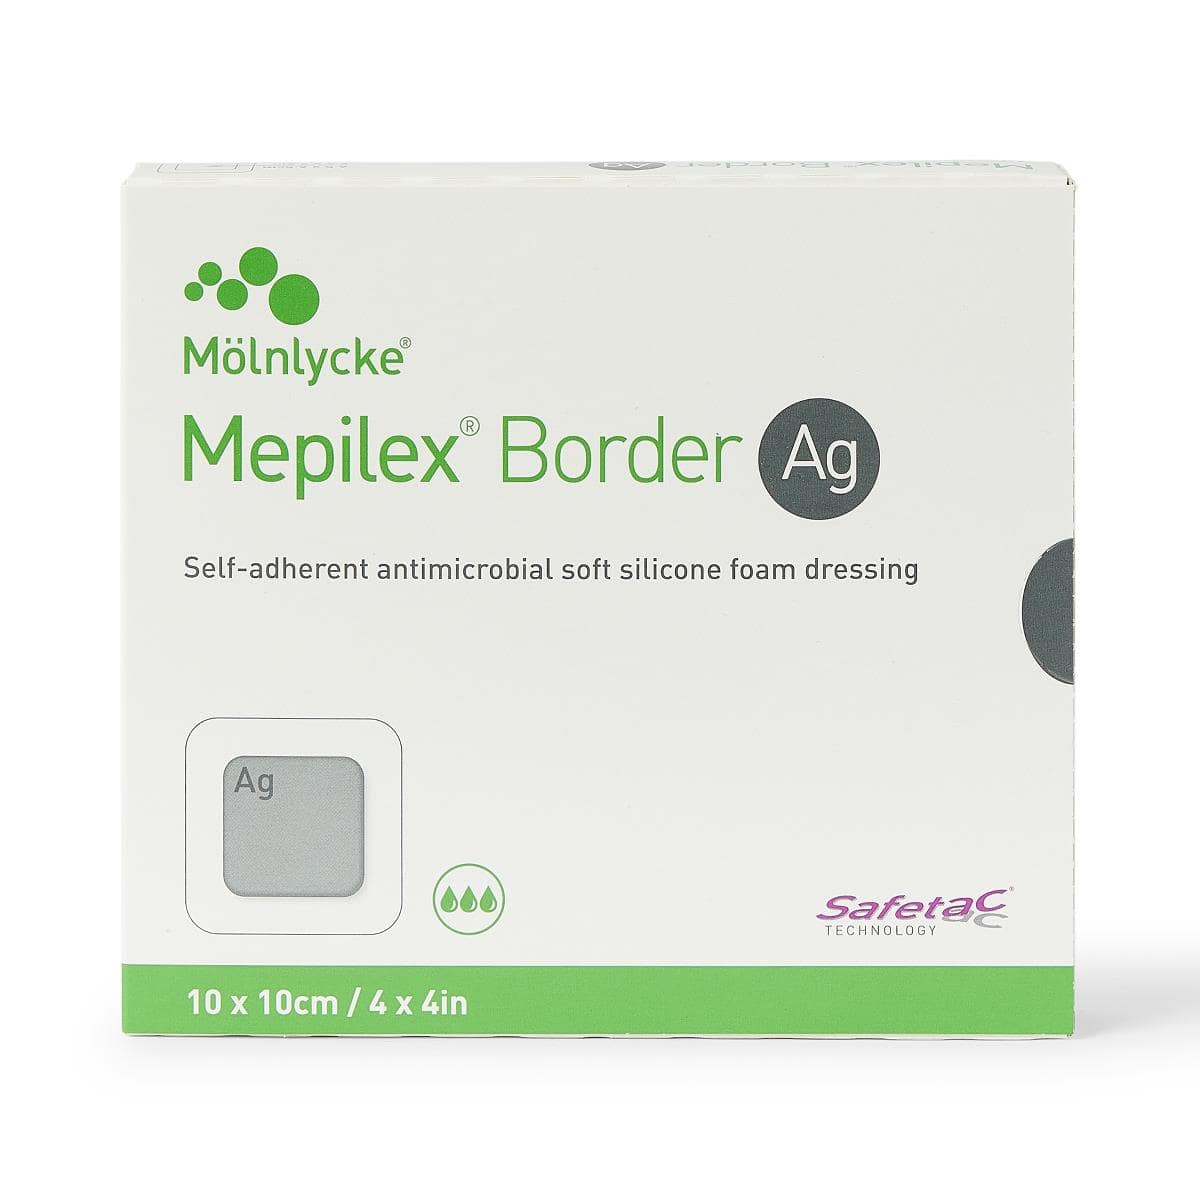 Image of Mepilex Border Ag Foam Dressing with Silver